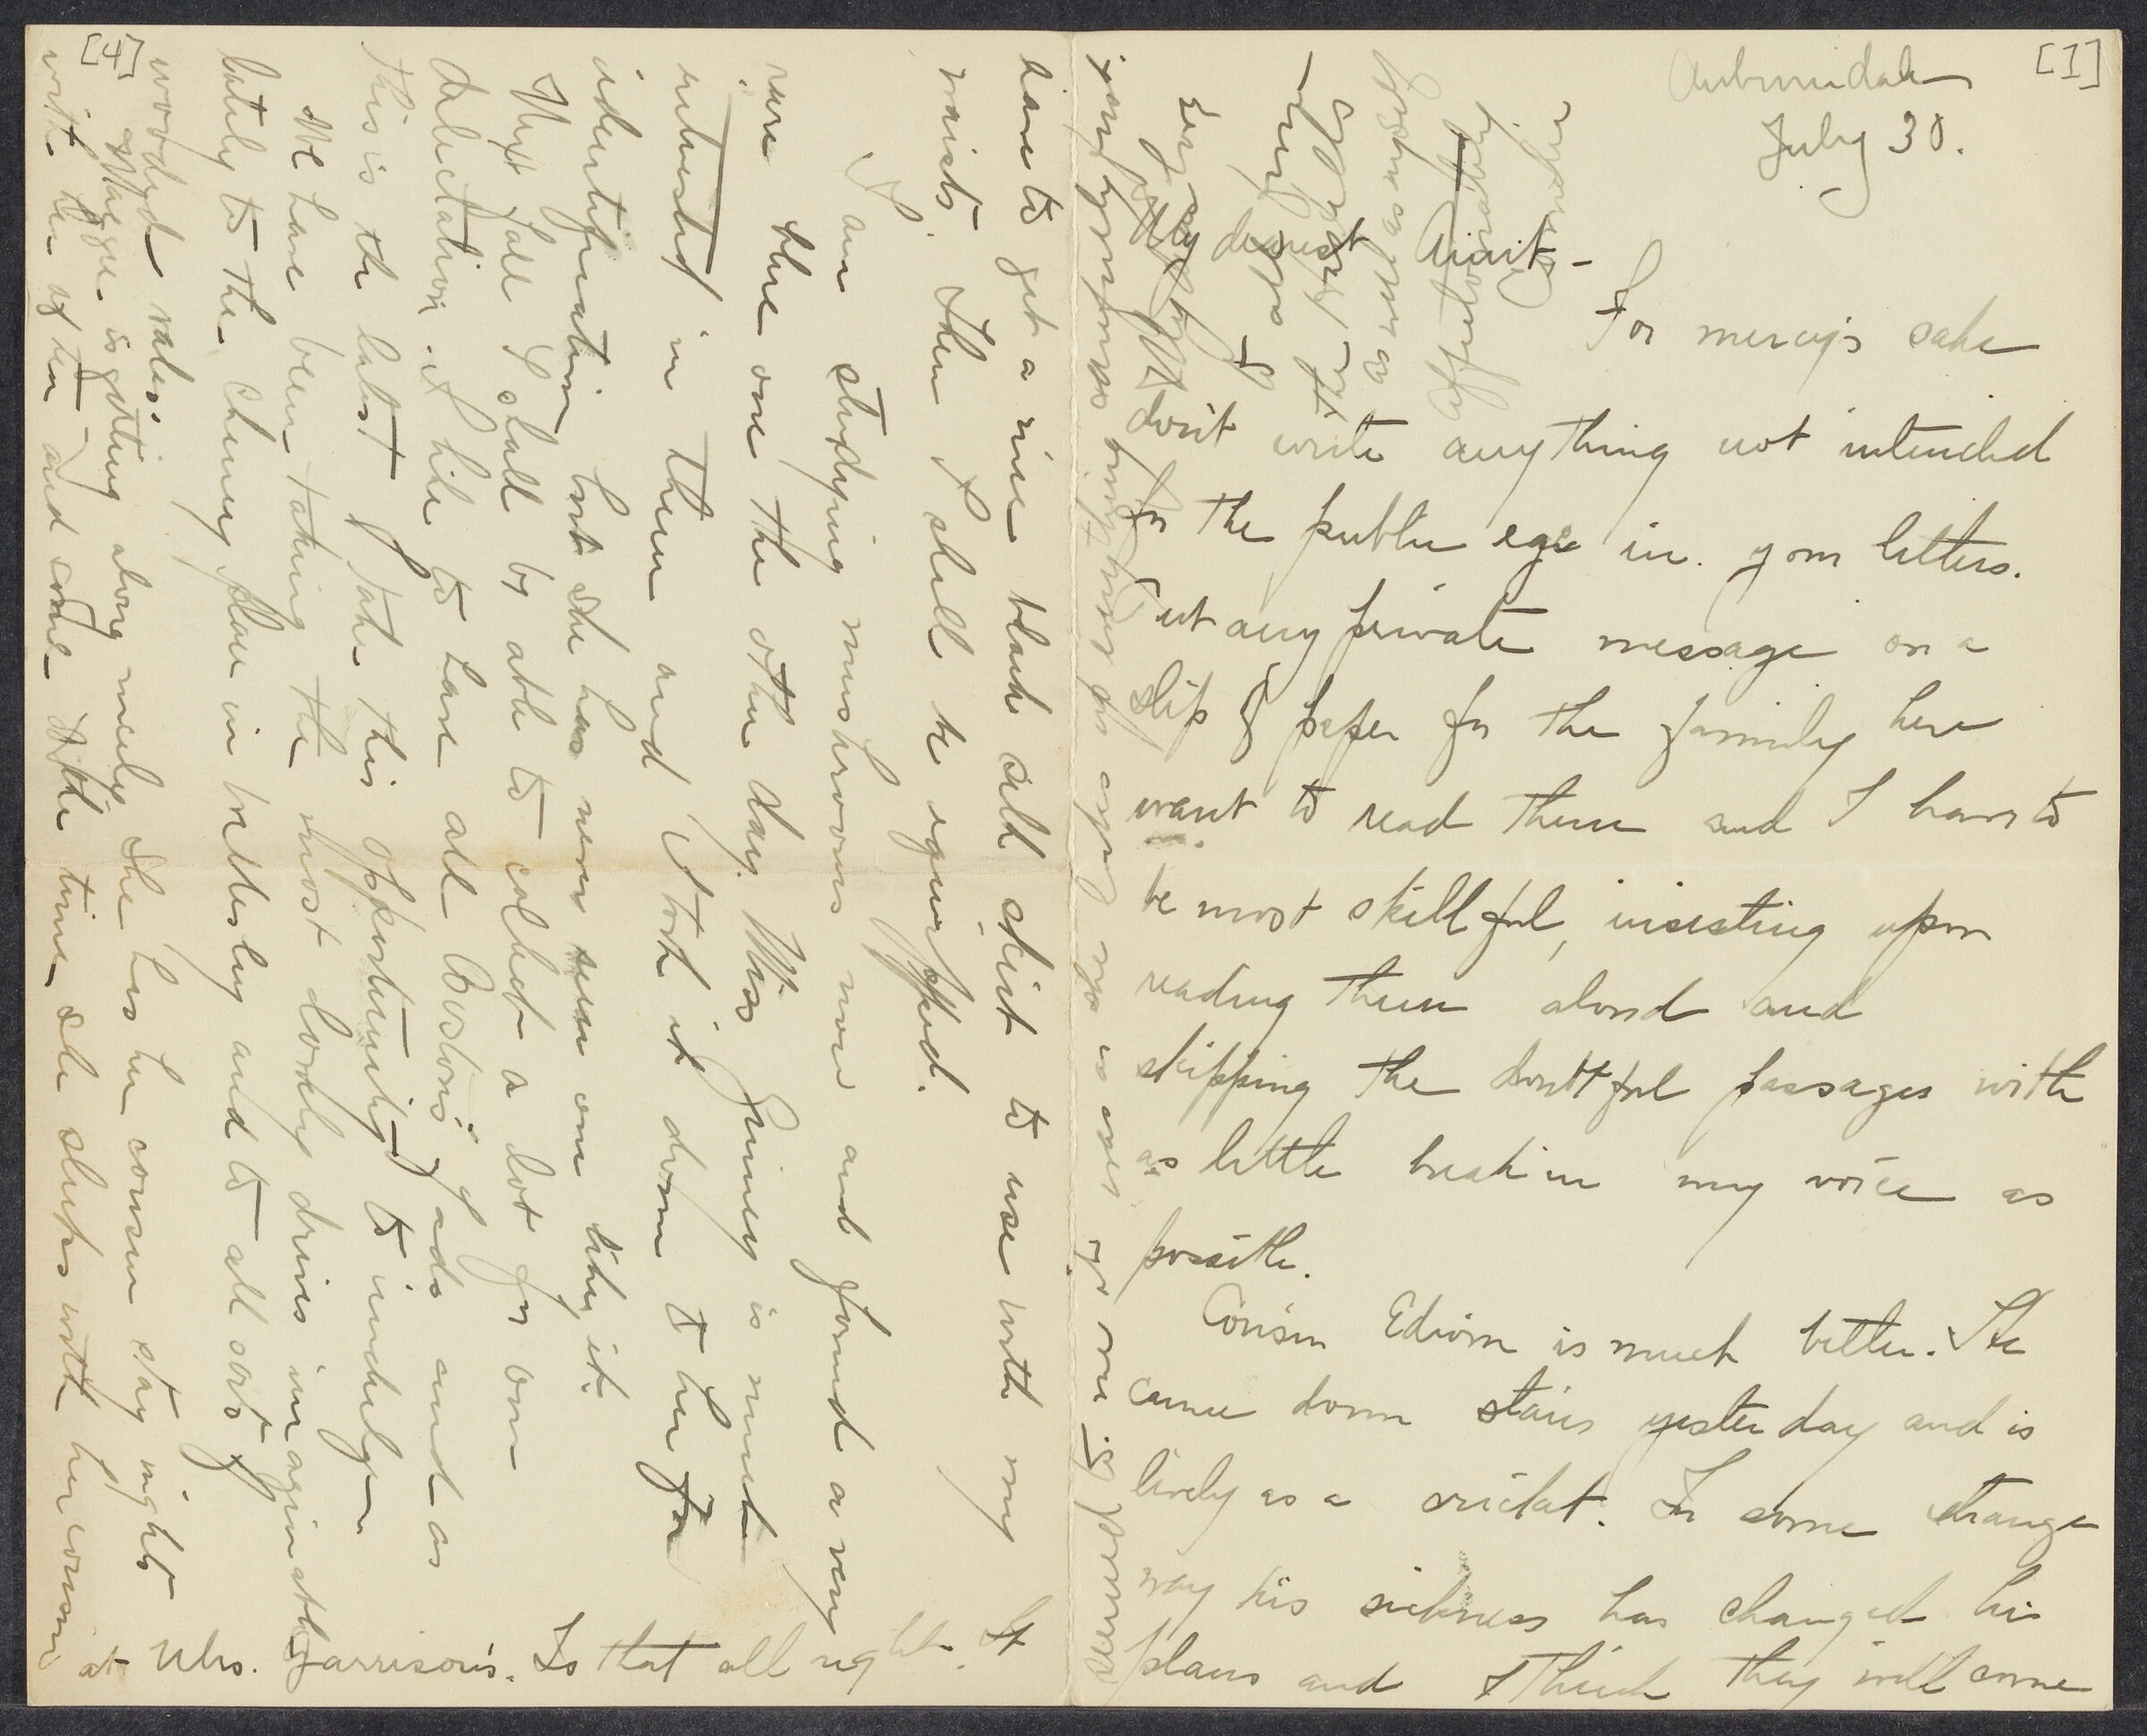 Letters from Cornelia James Cannon to her aunt, parents and sisters, ca.1893-1899